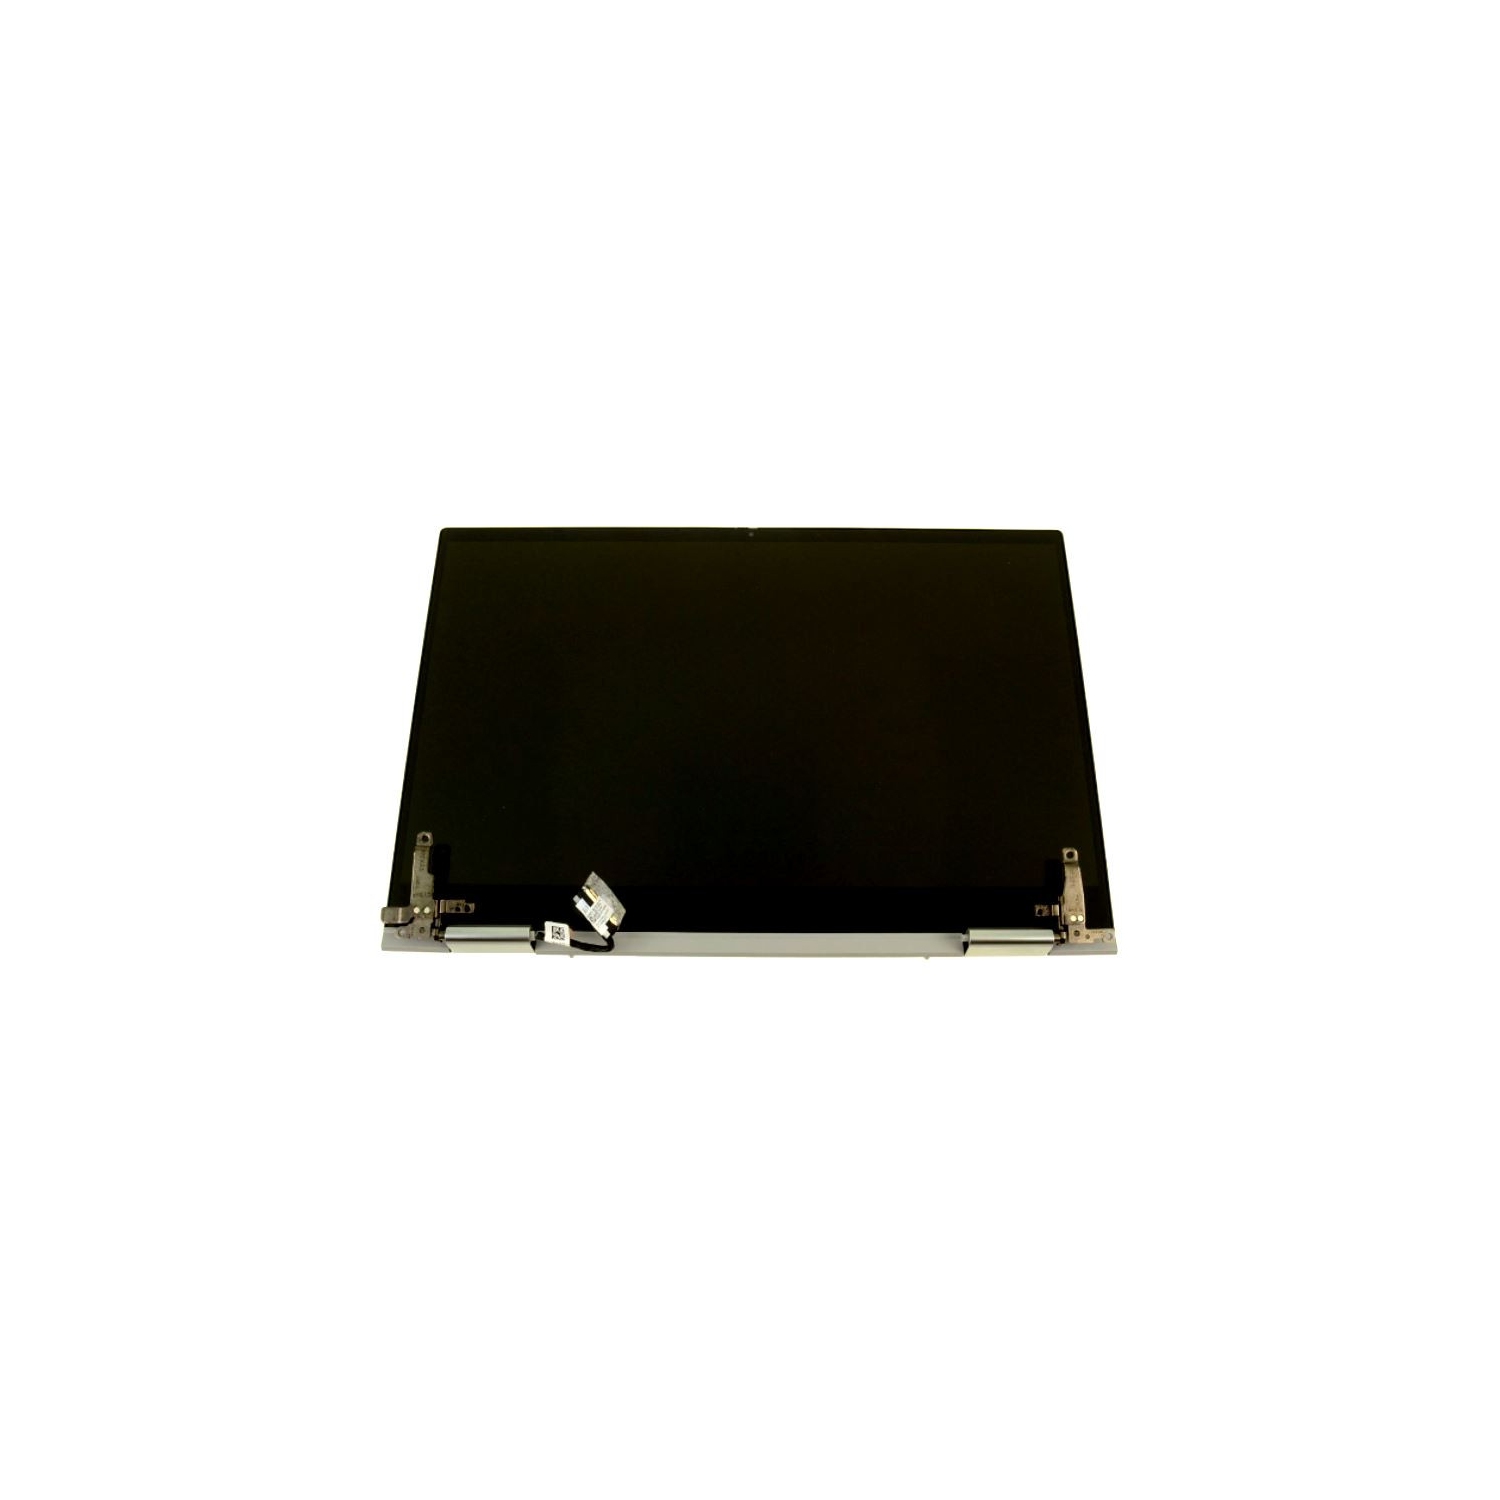 Refurbished (Good) Dell Original Inspiron 7506 2-in-1 15.6" FHD LCD Display Touch Screen Assembly RYKP9